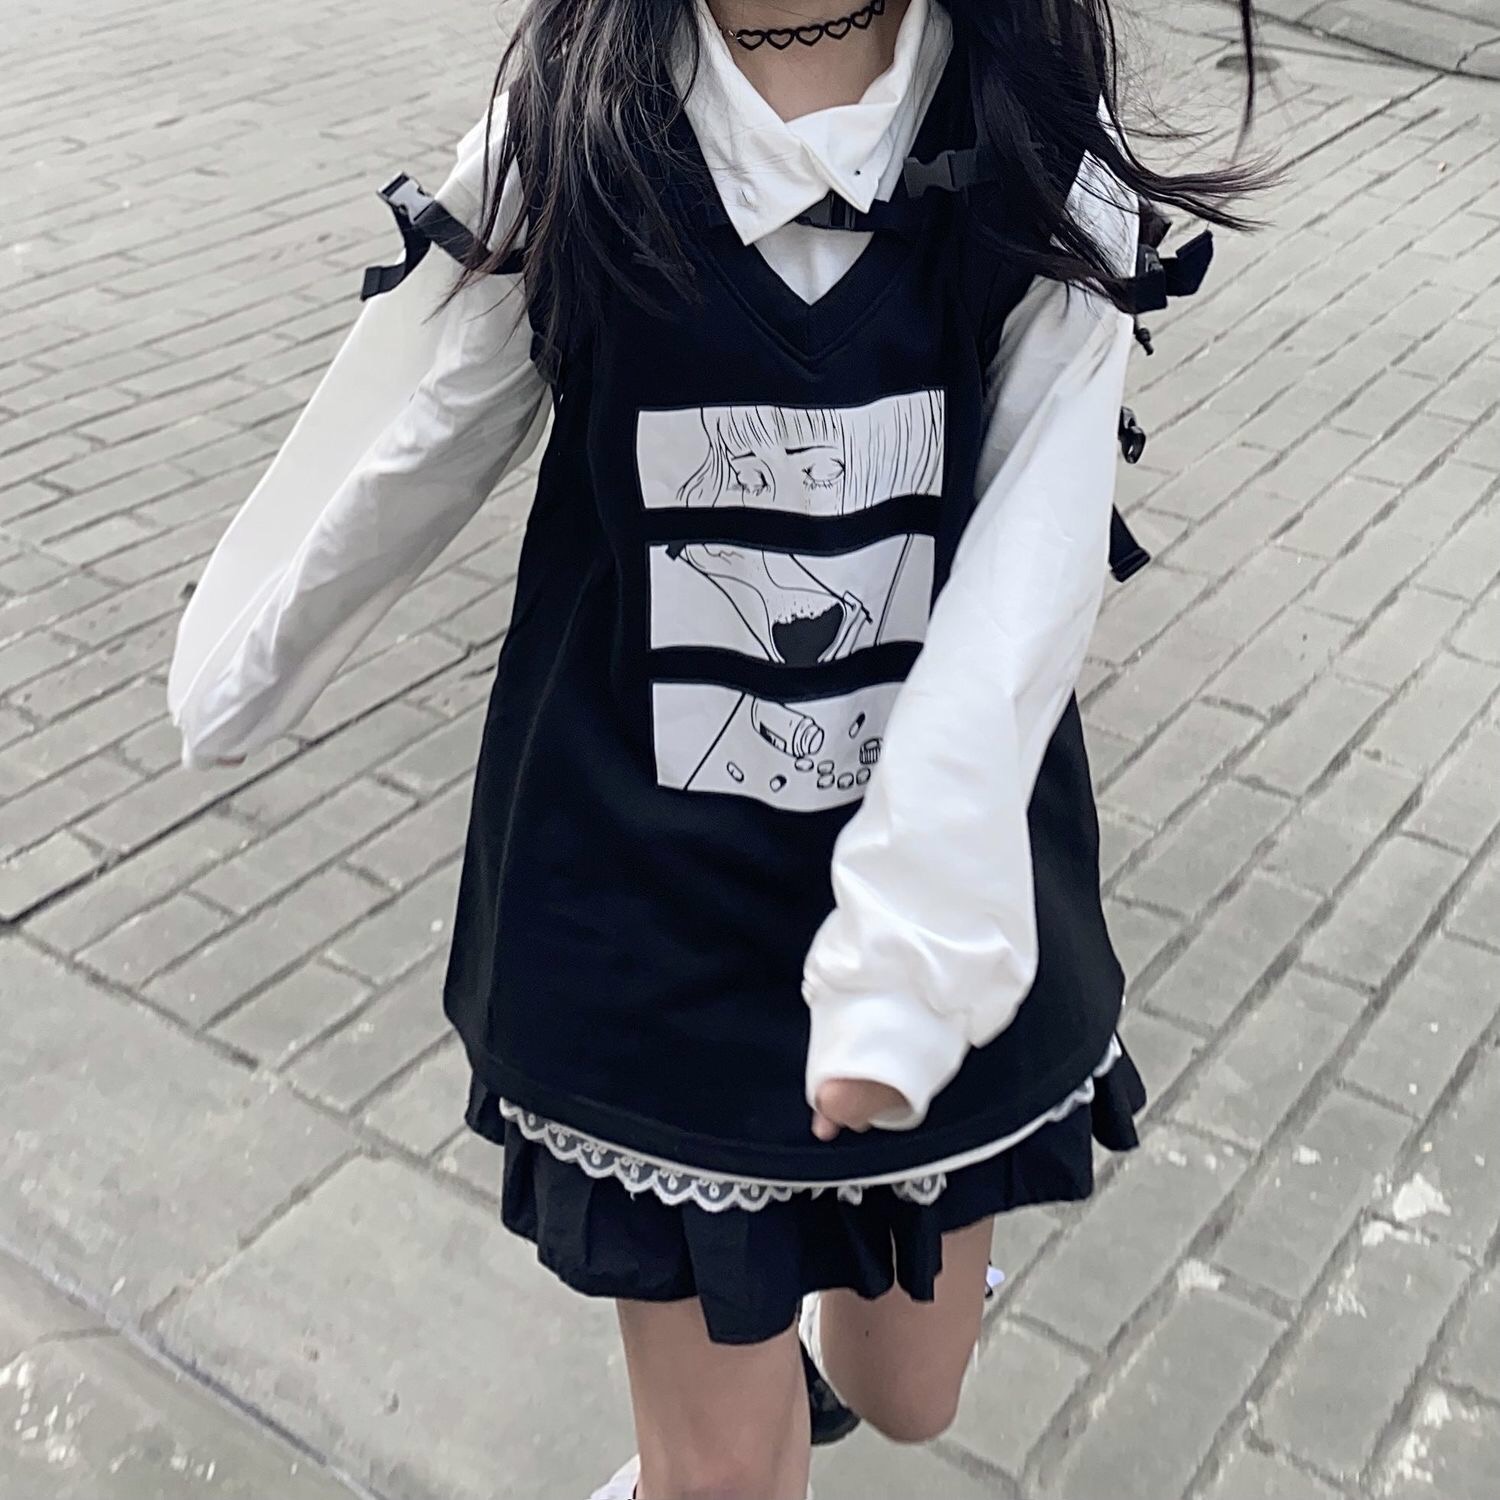 Two Piece White Long Sleeve + Black Sweatersolar system Soft girl lovely Harajuku Sweet cool handsome Academic atmosphere jk lattice Close your waist Show thin camisole lace skirt